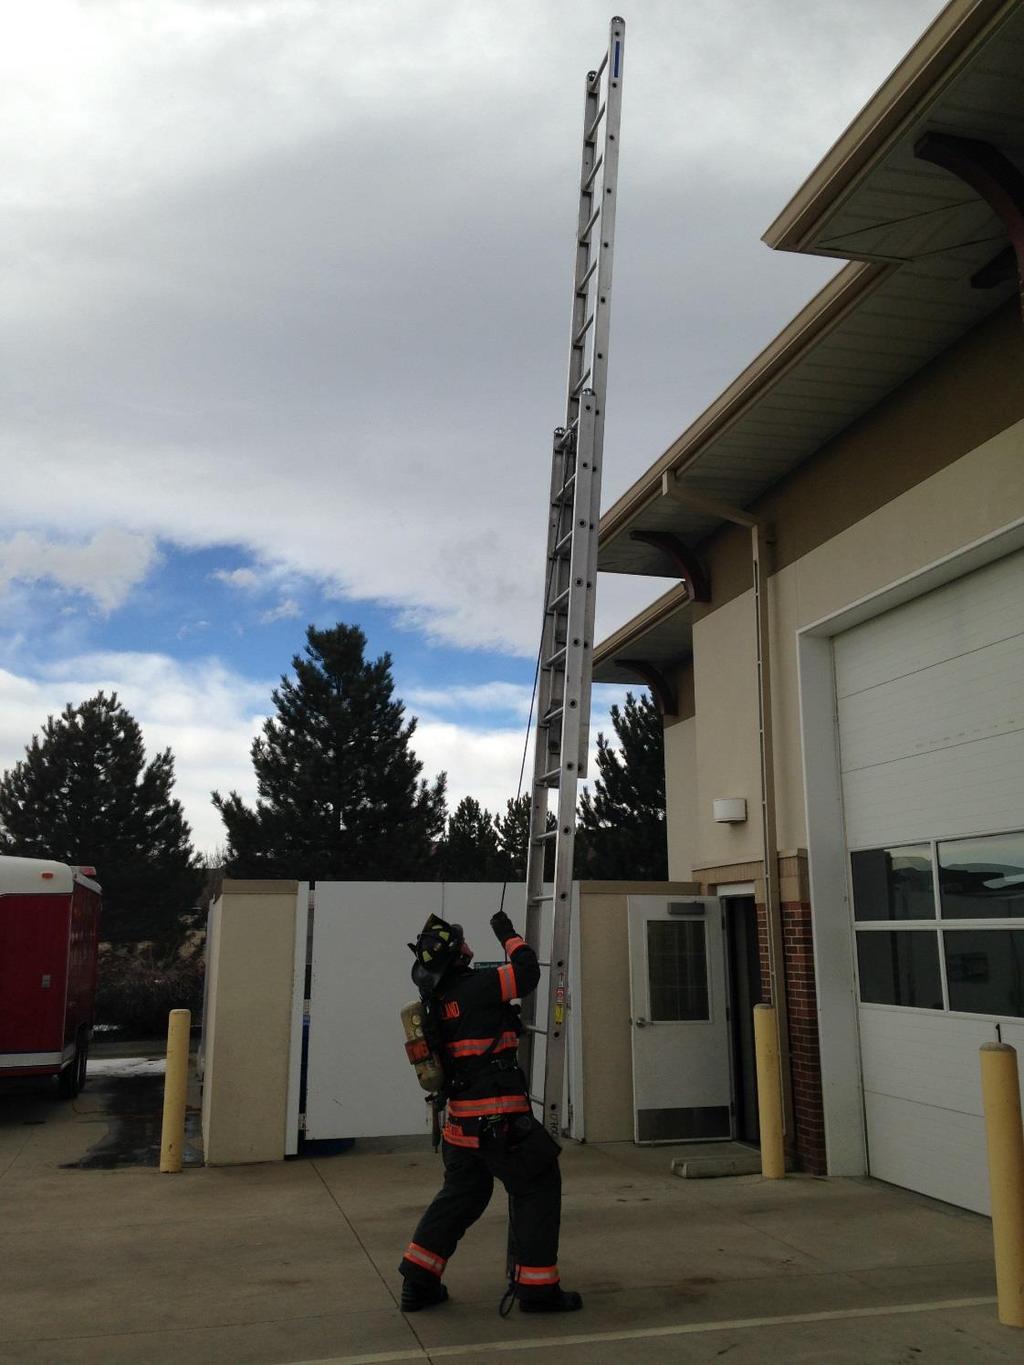 #5 Use a controlled hand over hand method to extend the ladder to the proper height (3-5 rungs above the roof line).